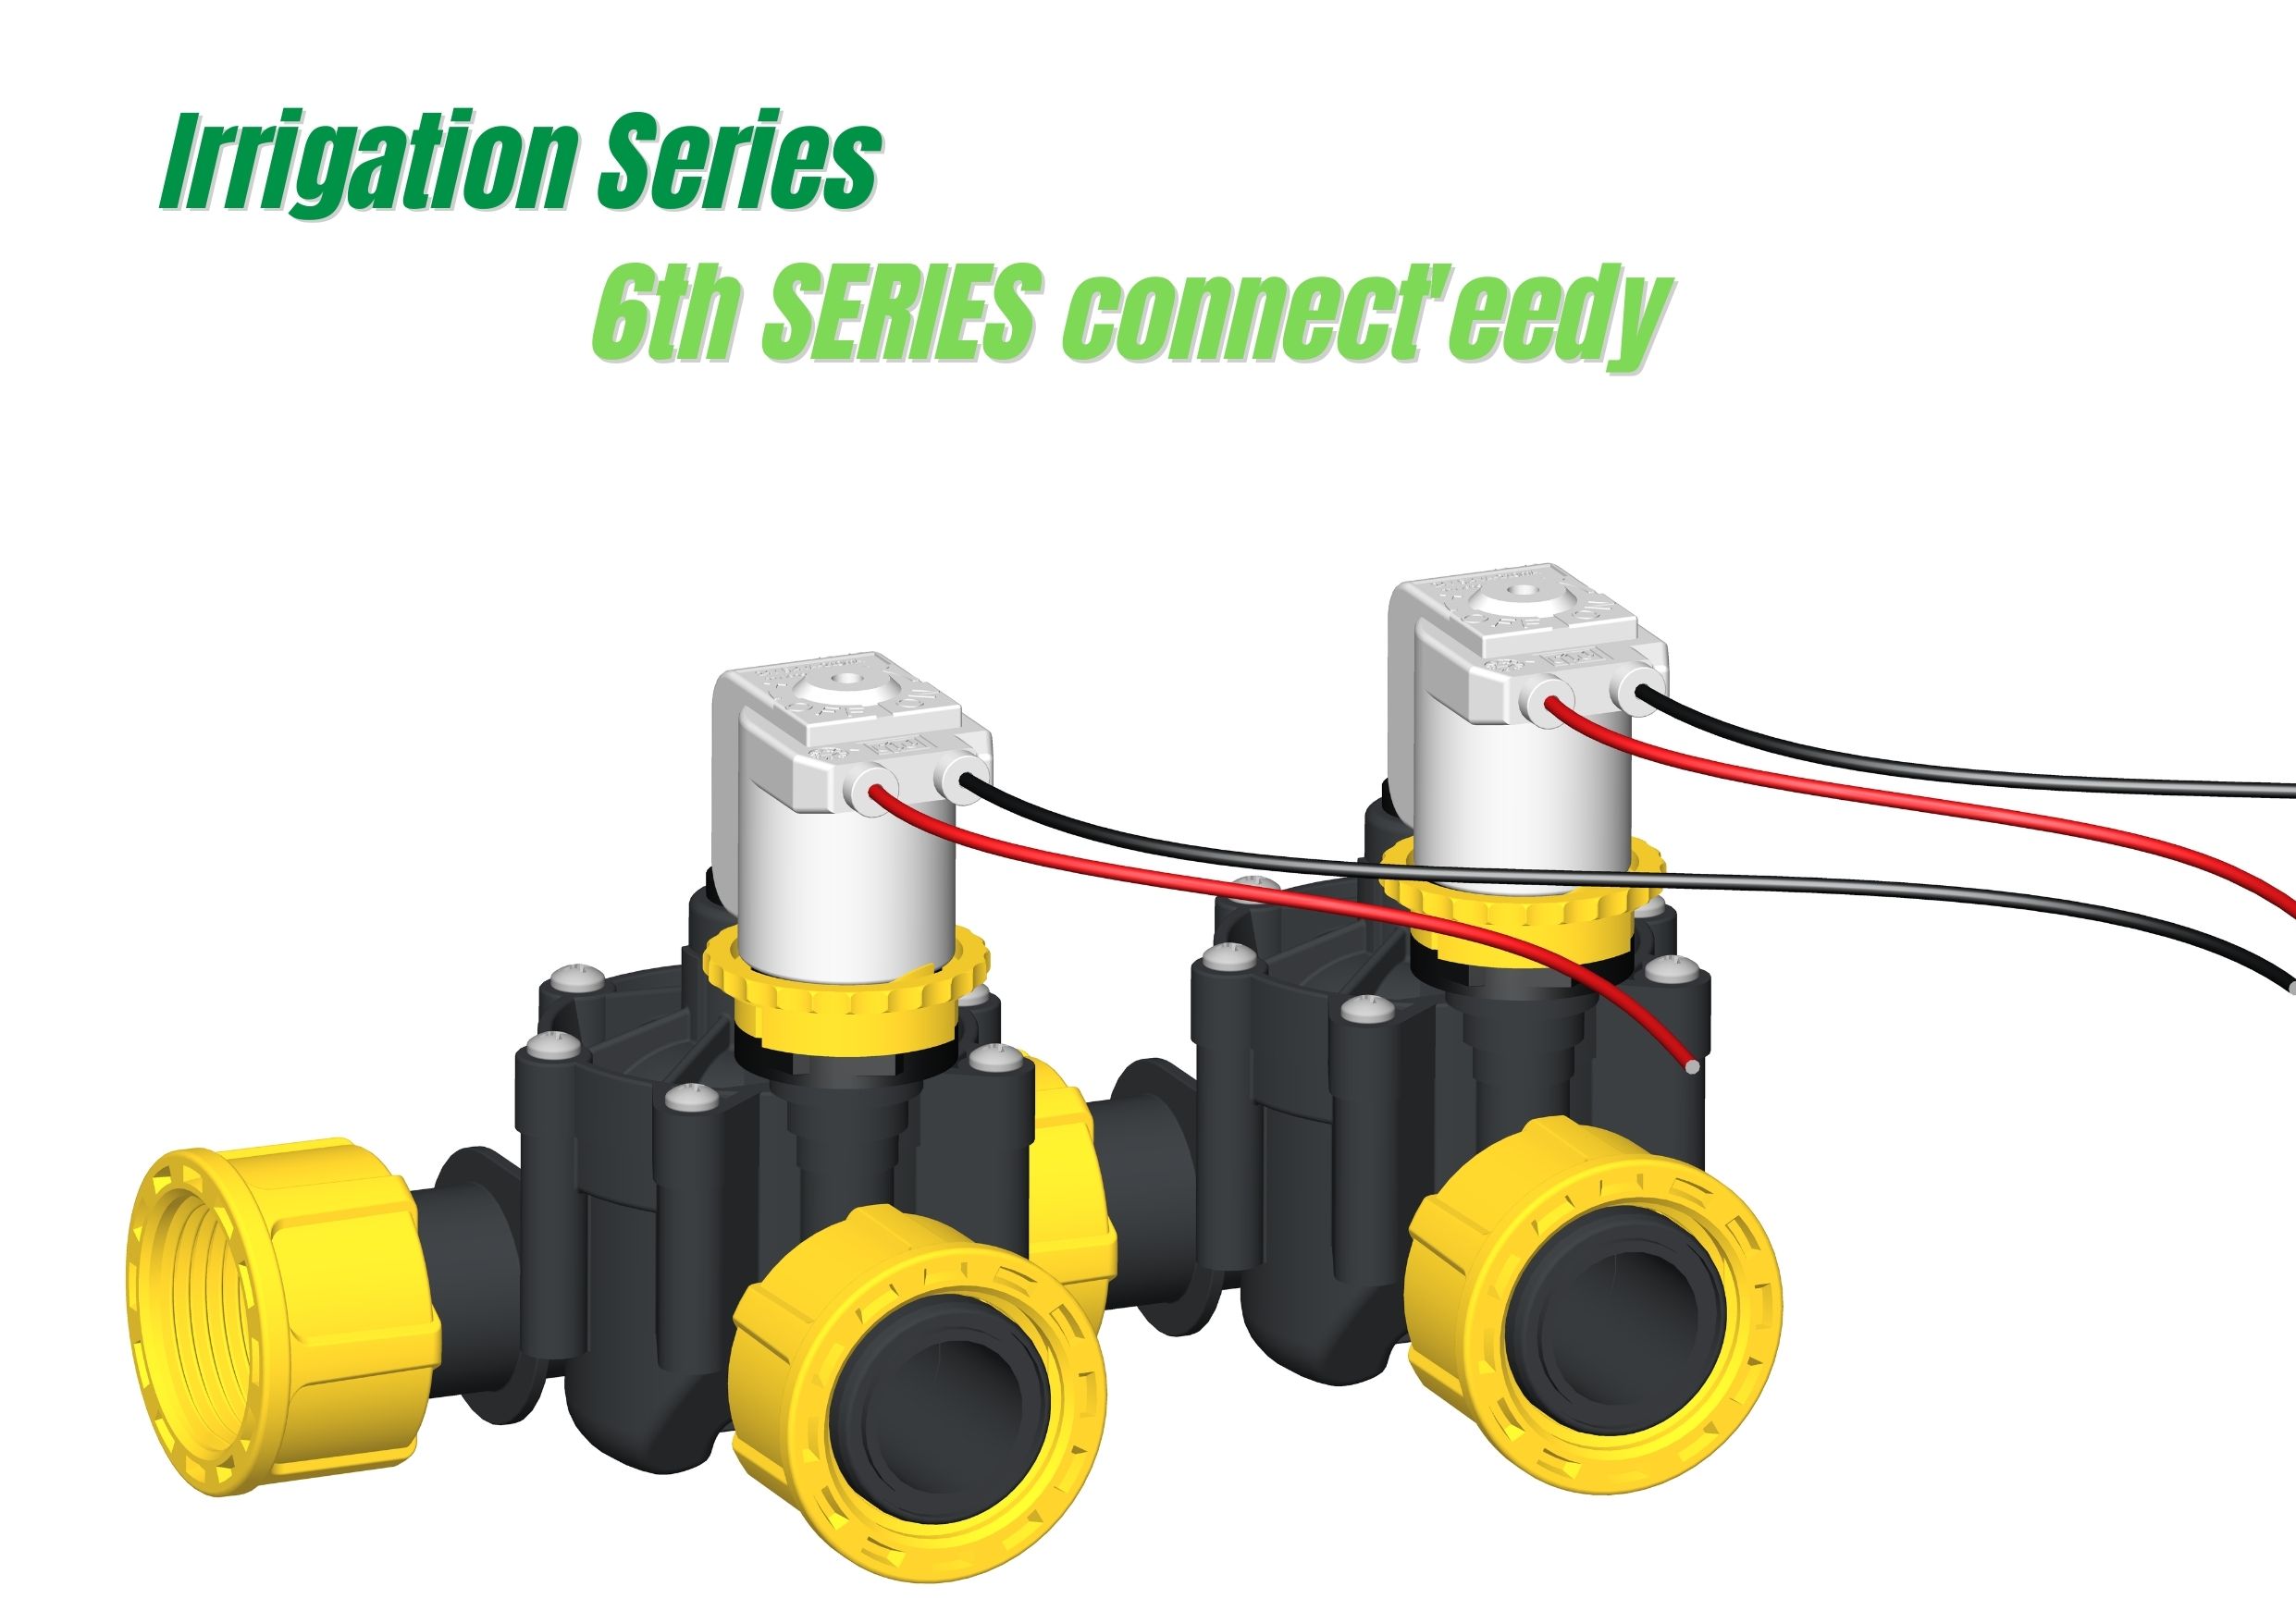 RPE introduces "6th Series Connect'eedy"  the new solenoid valves for the irrigation industry 